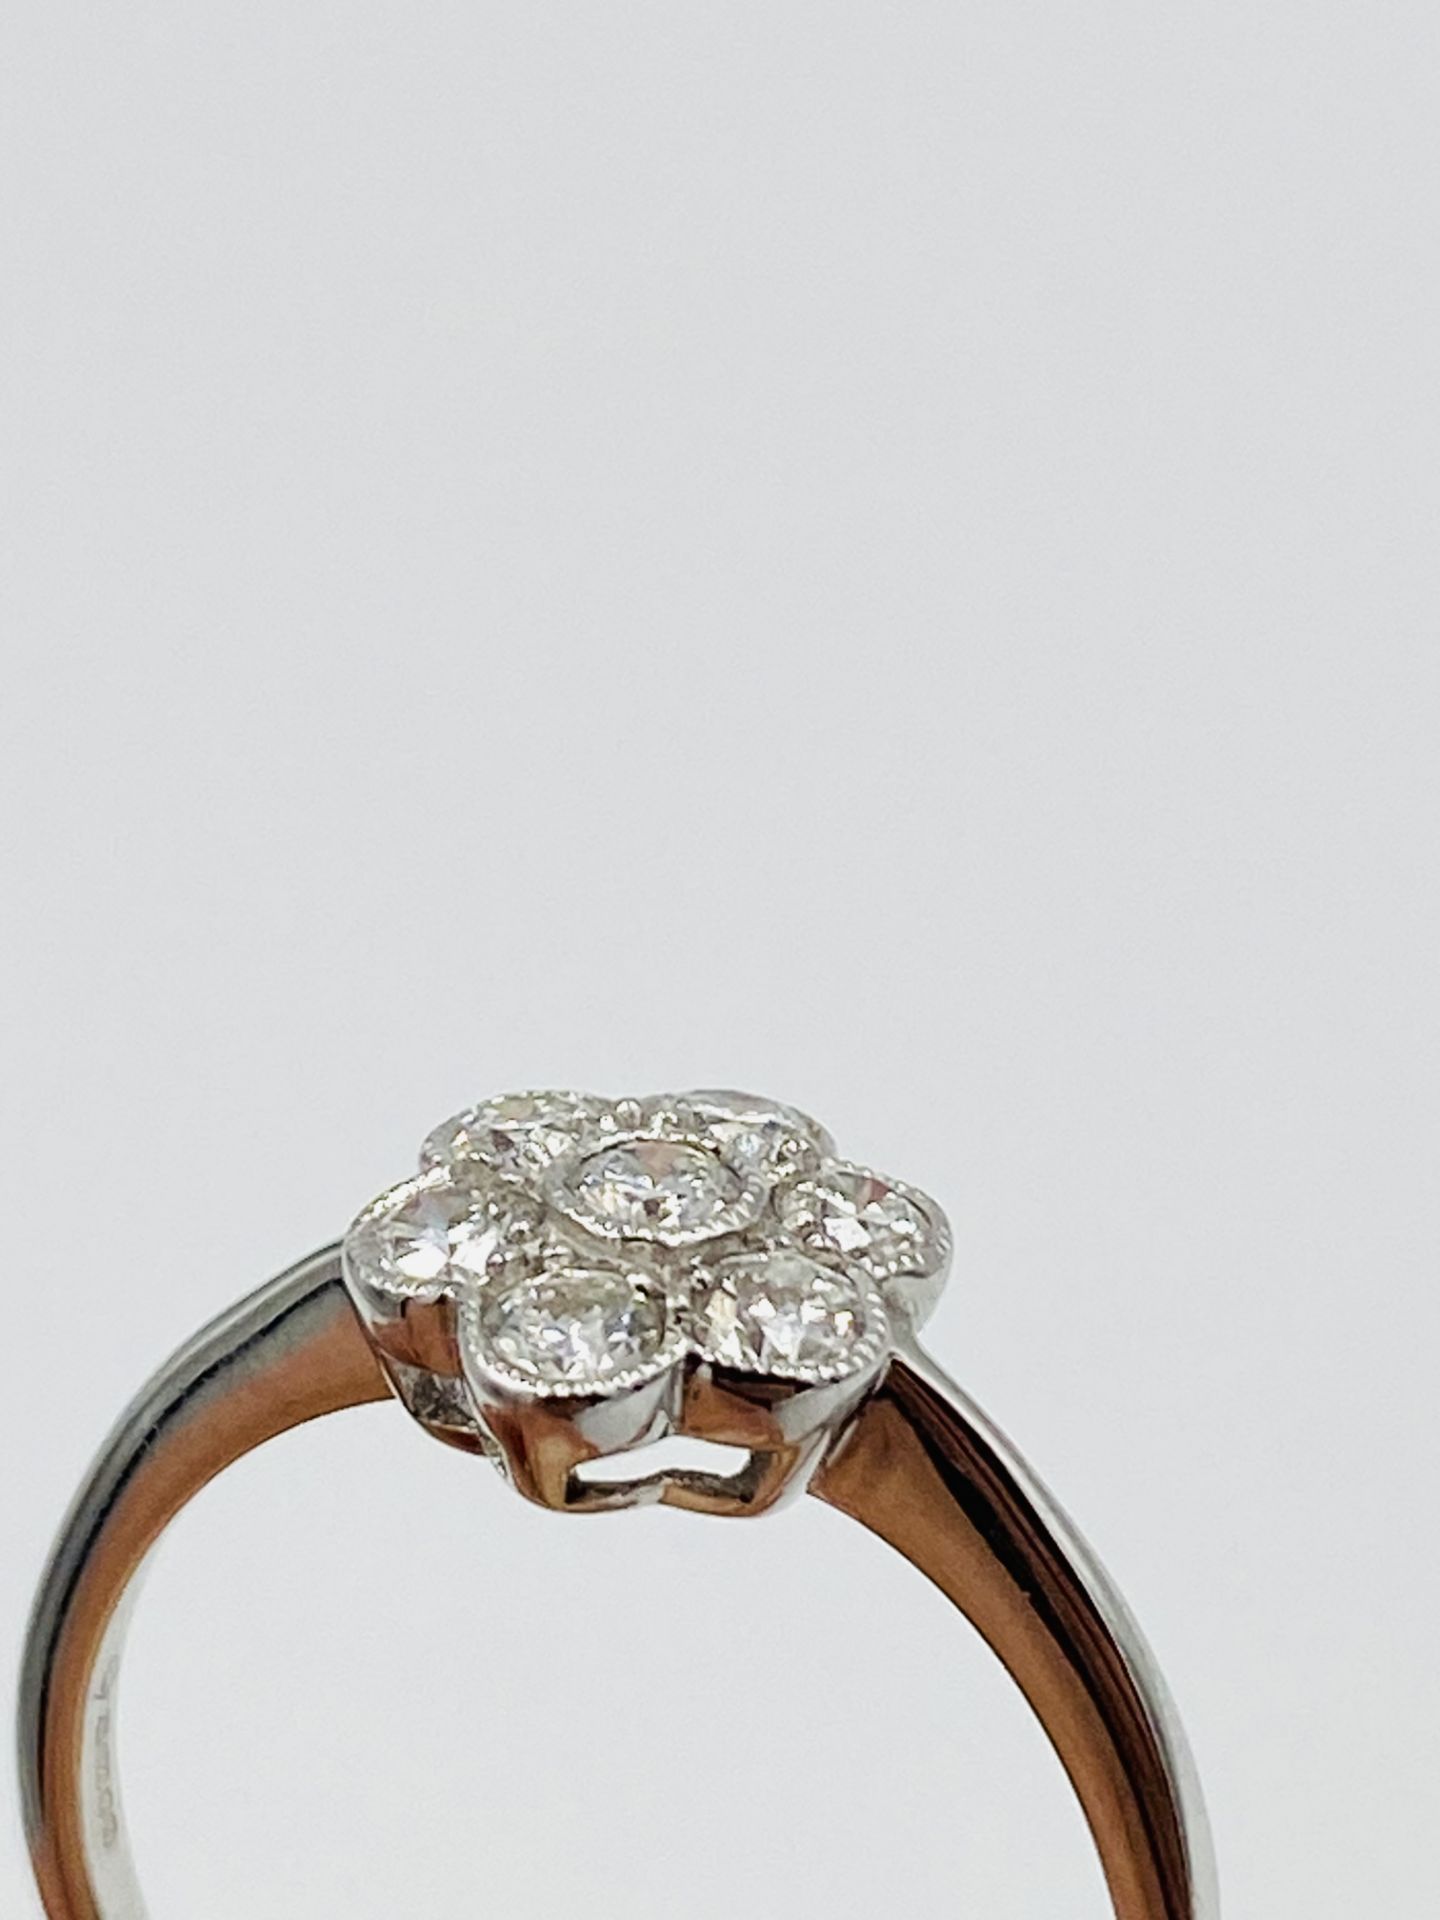 18ct white gold and diamond ring - Image 4 of 5